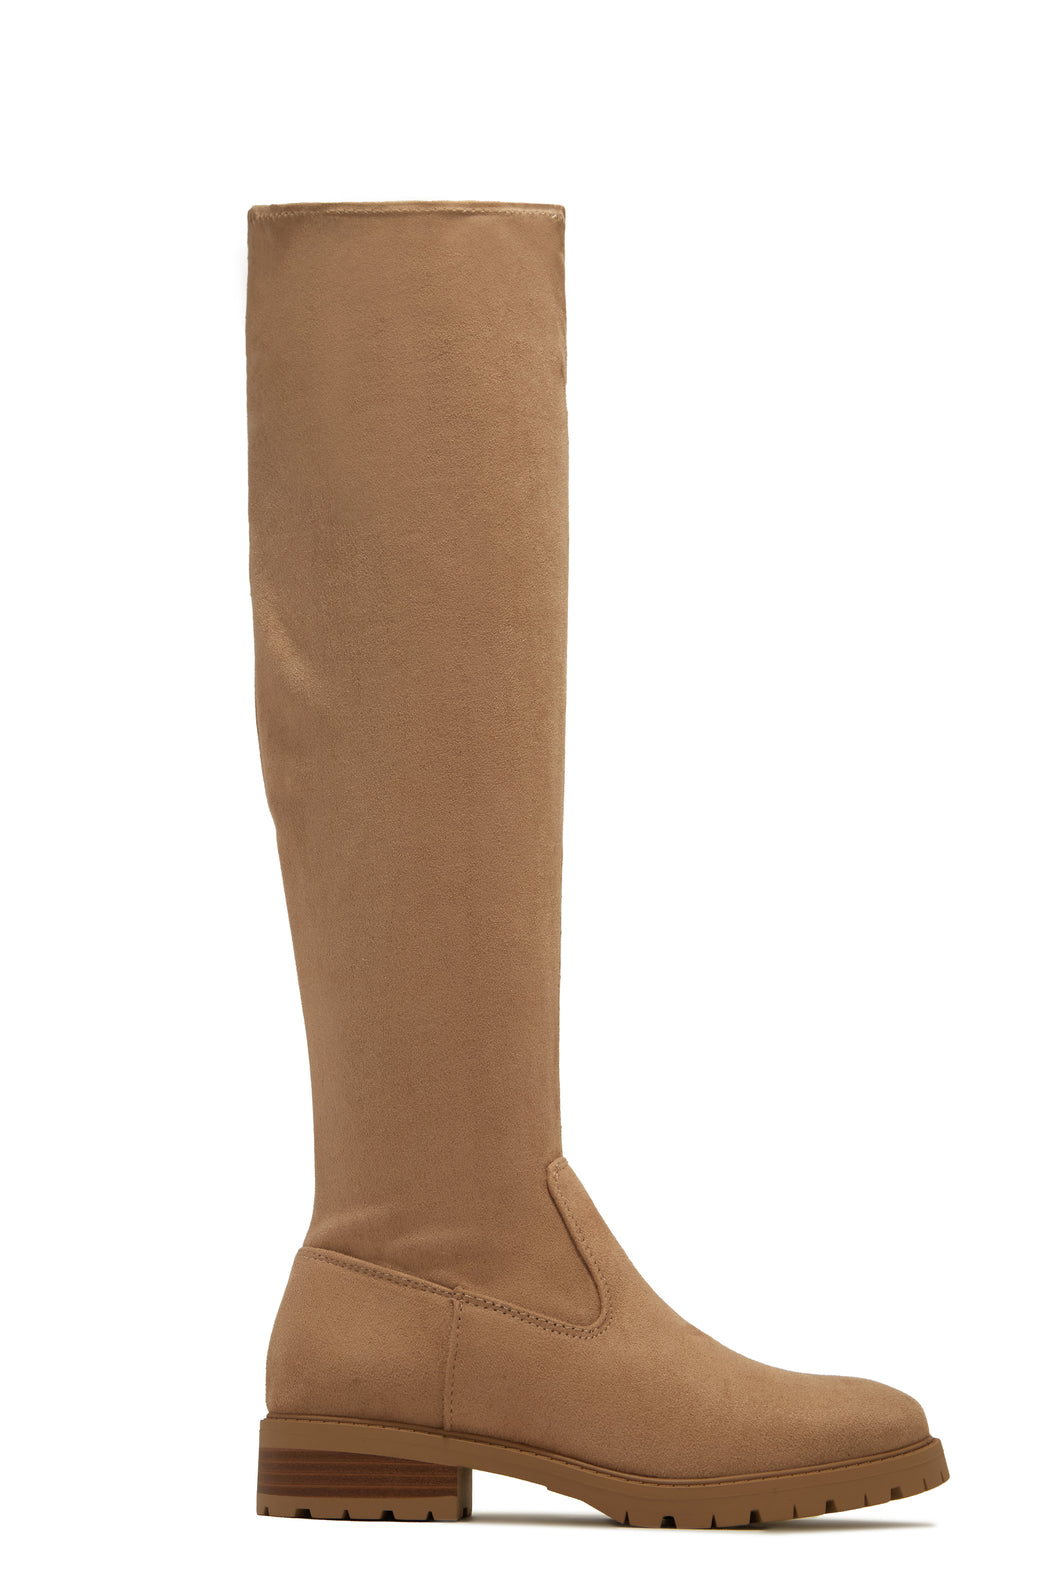 Chilly Nights Flat Over The Knee Boots - Dark Nude